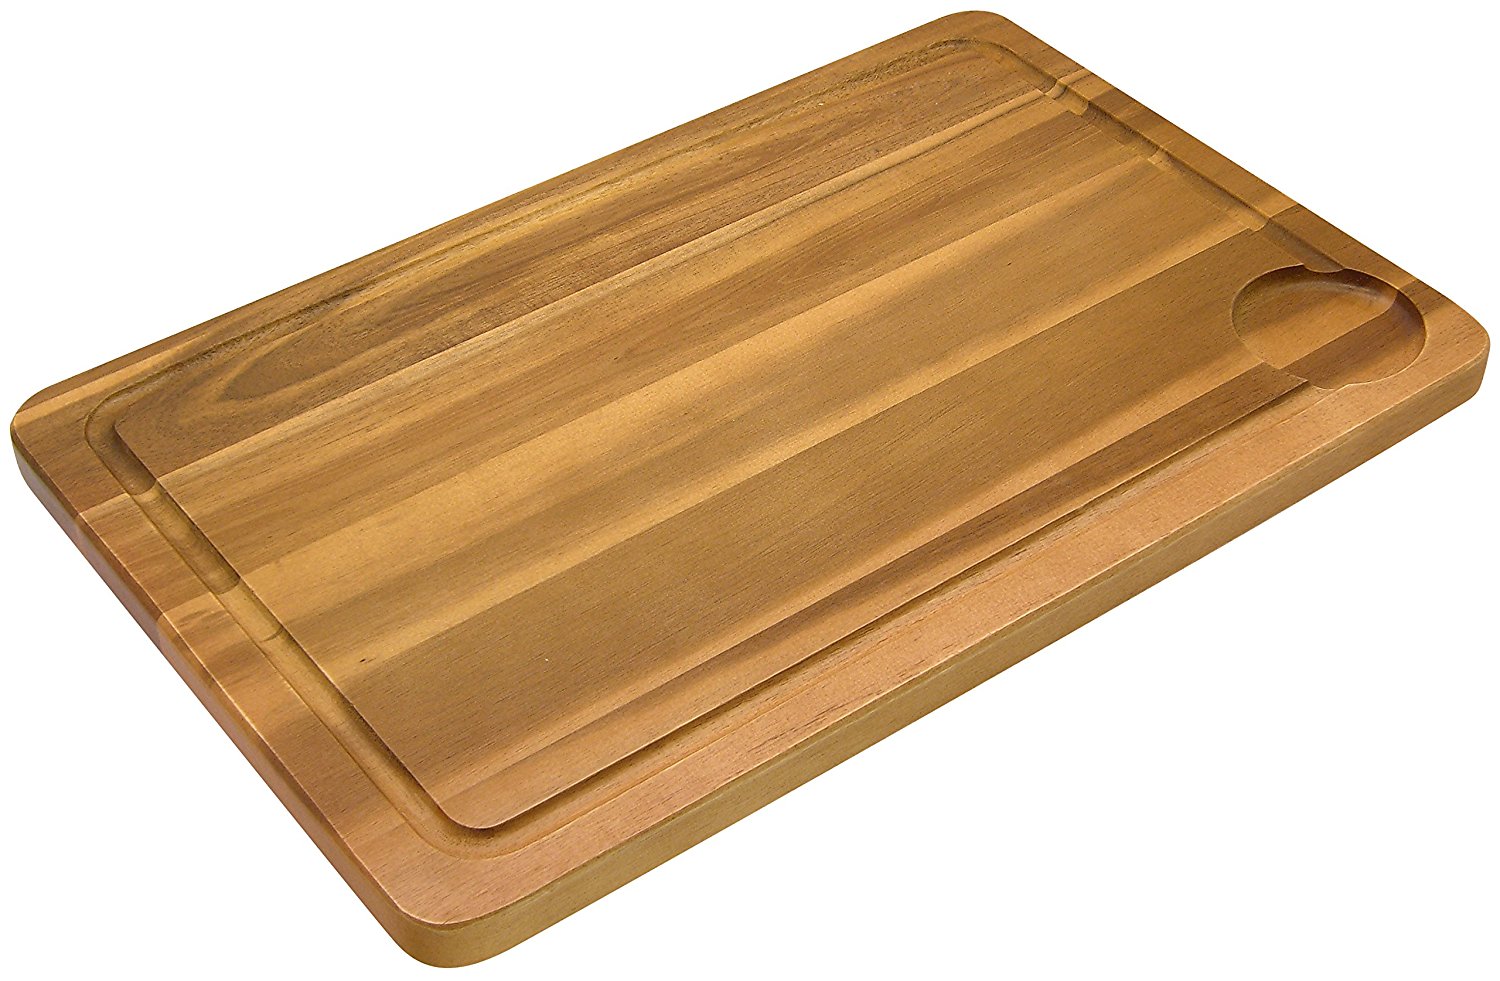 category_V1010 - Wooden Chopping Board